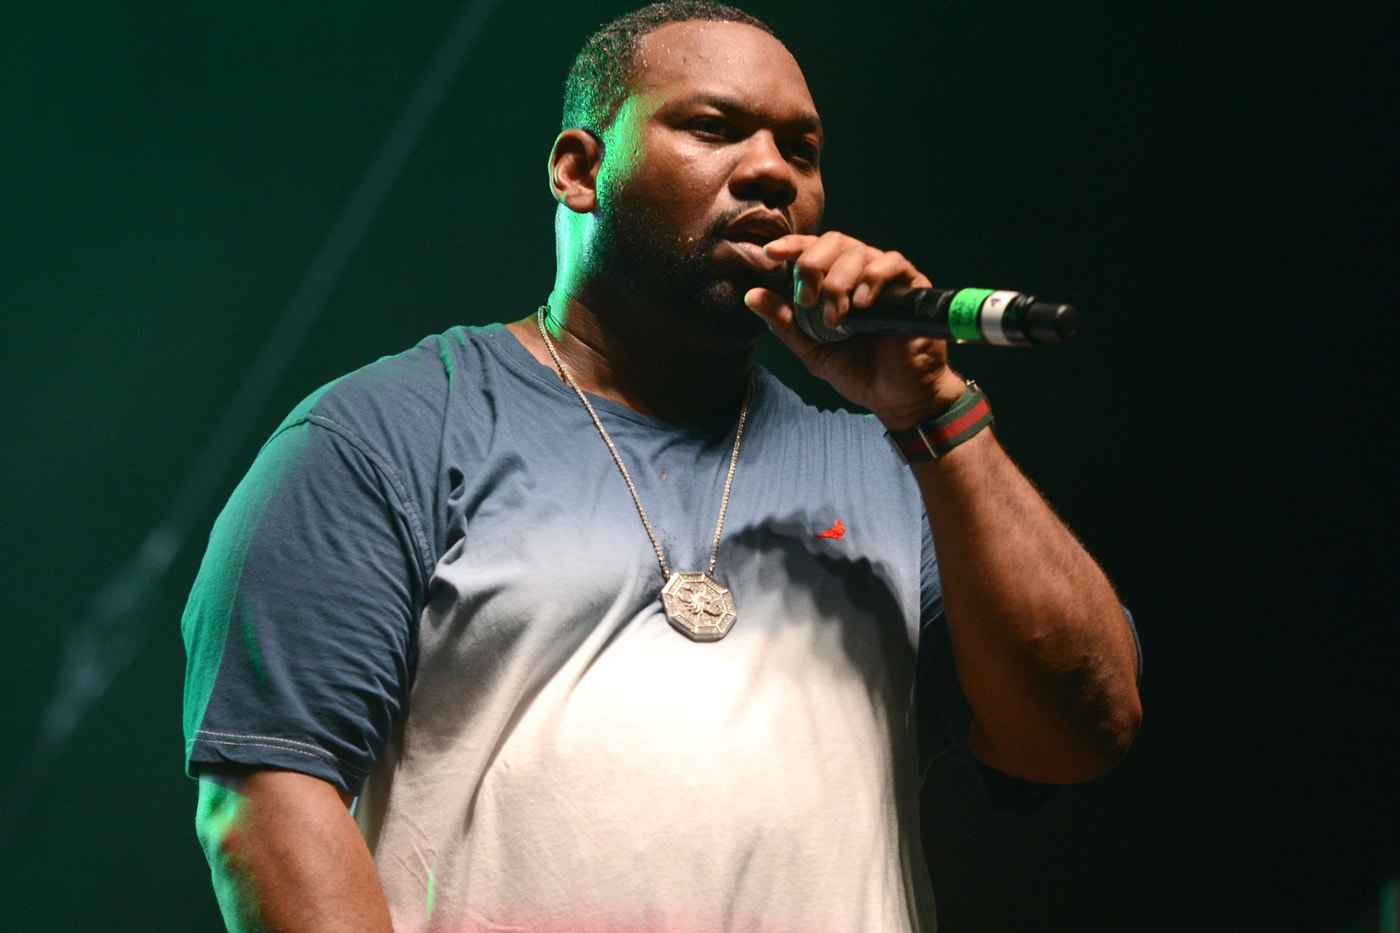 Raekwon featuring The Game - About Me (Remix) (Produced by Dr Dre)